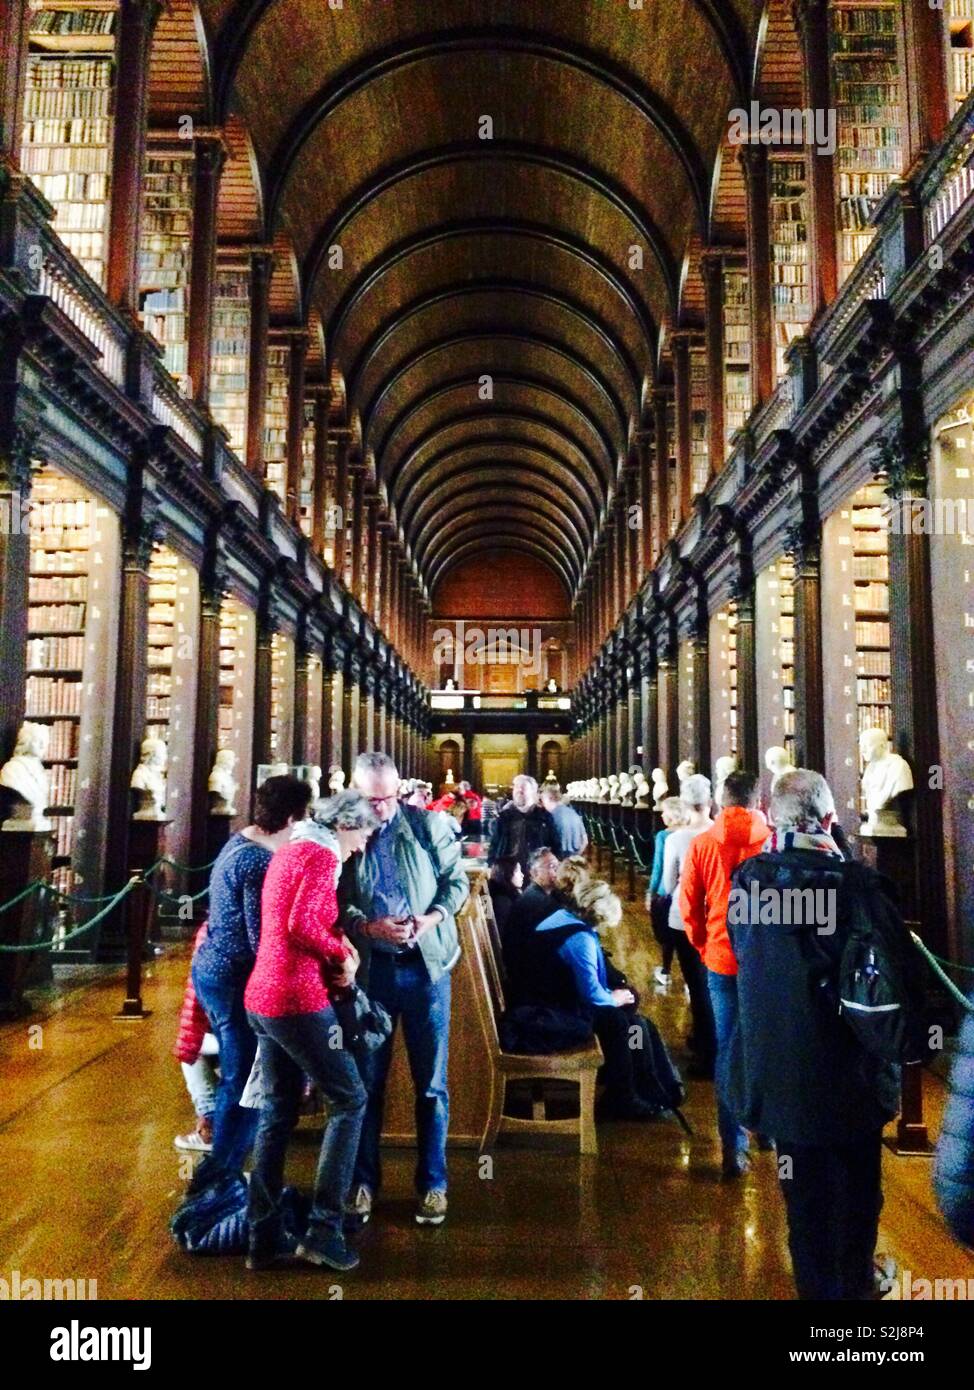 The Long Room of the Old Library at Trinity College in Dublin Ireland with many tourists and people visiting Stock Photo